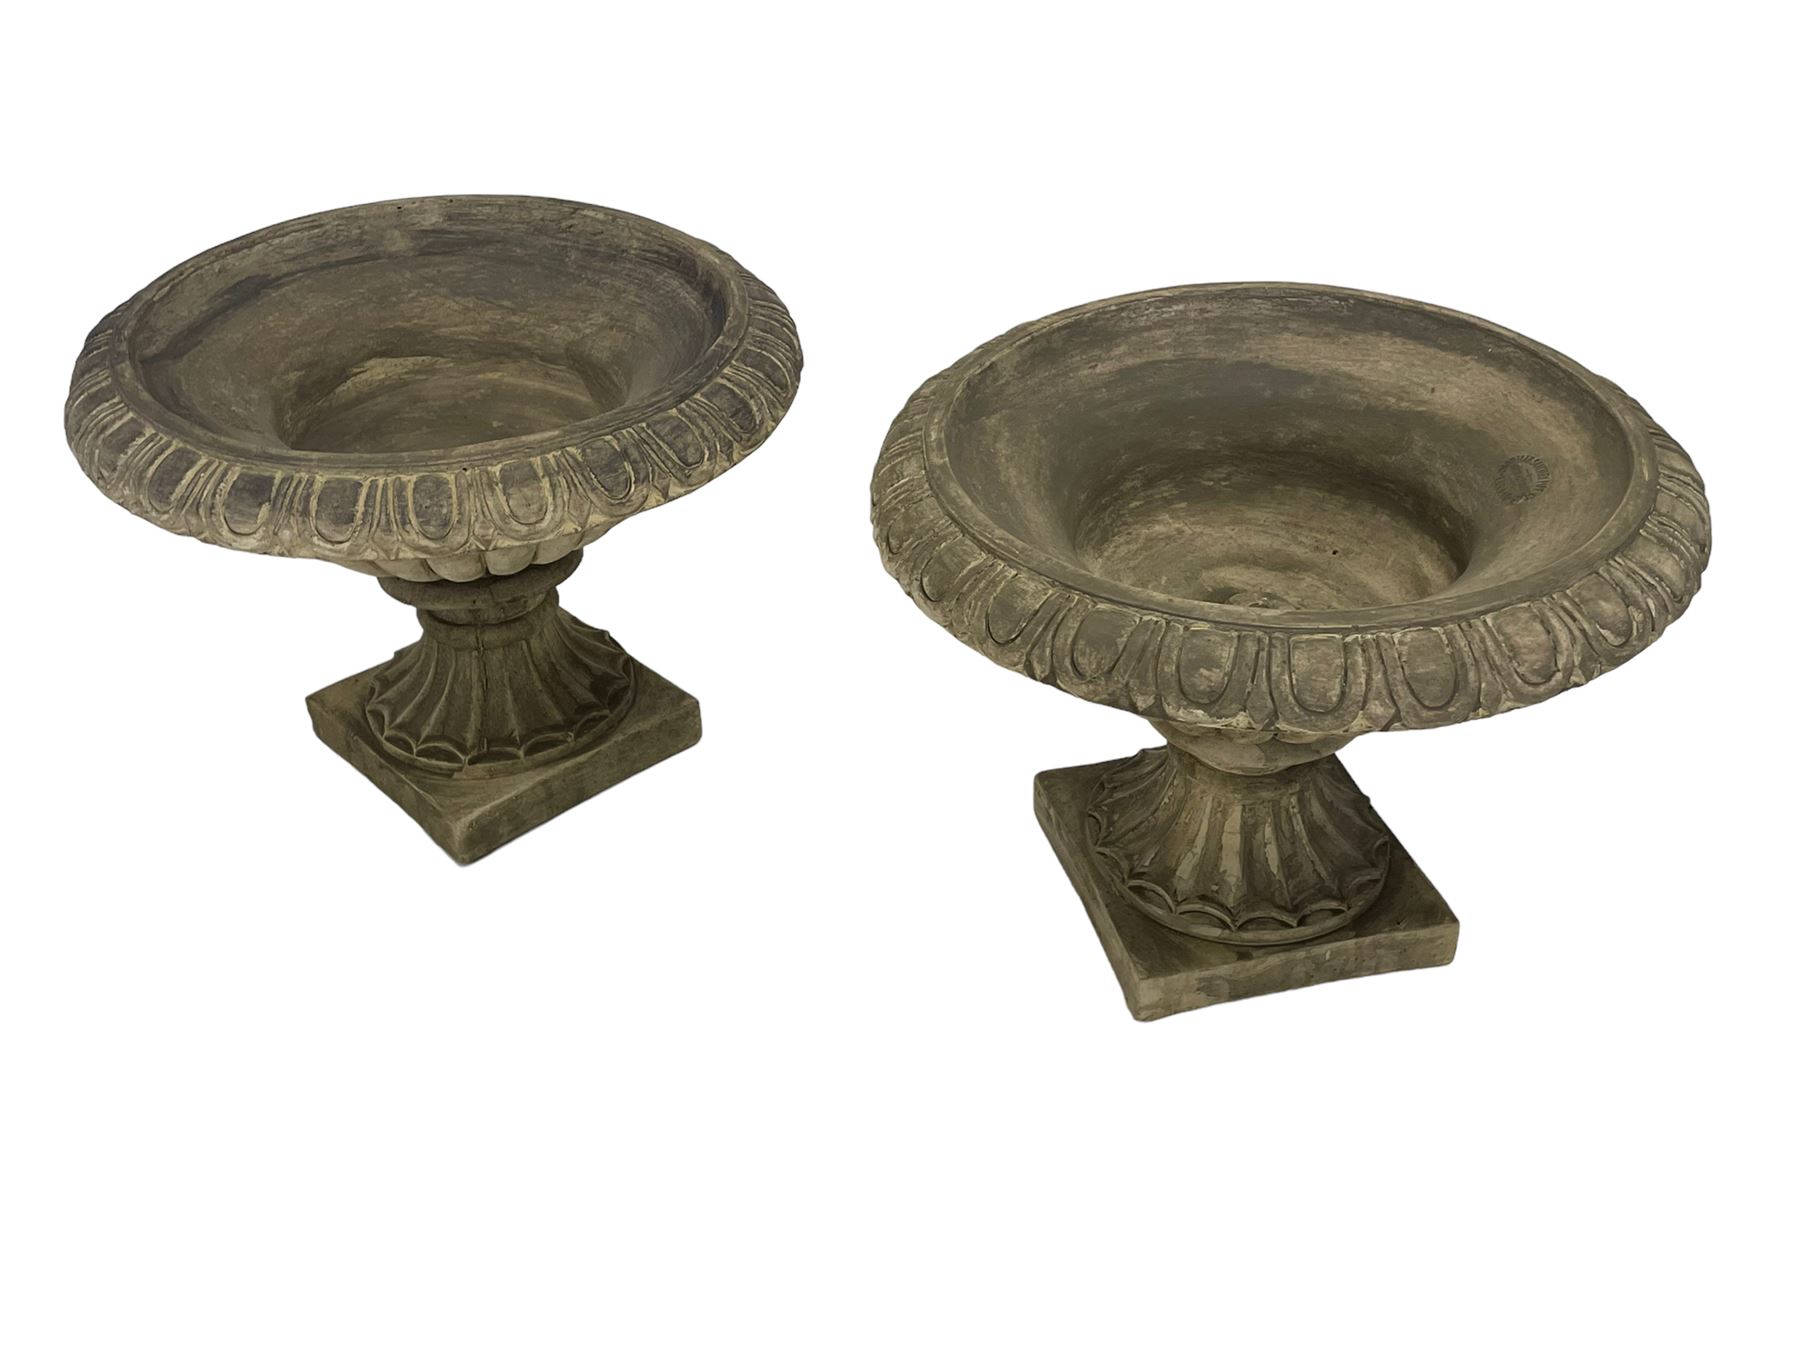 Pair of composite stone classical urn planters - Image 3 of 5